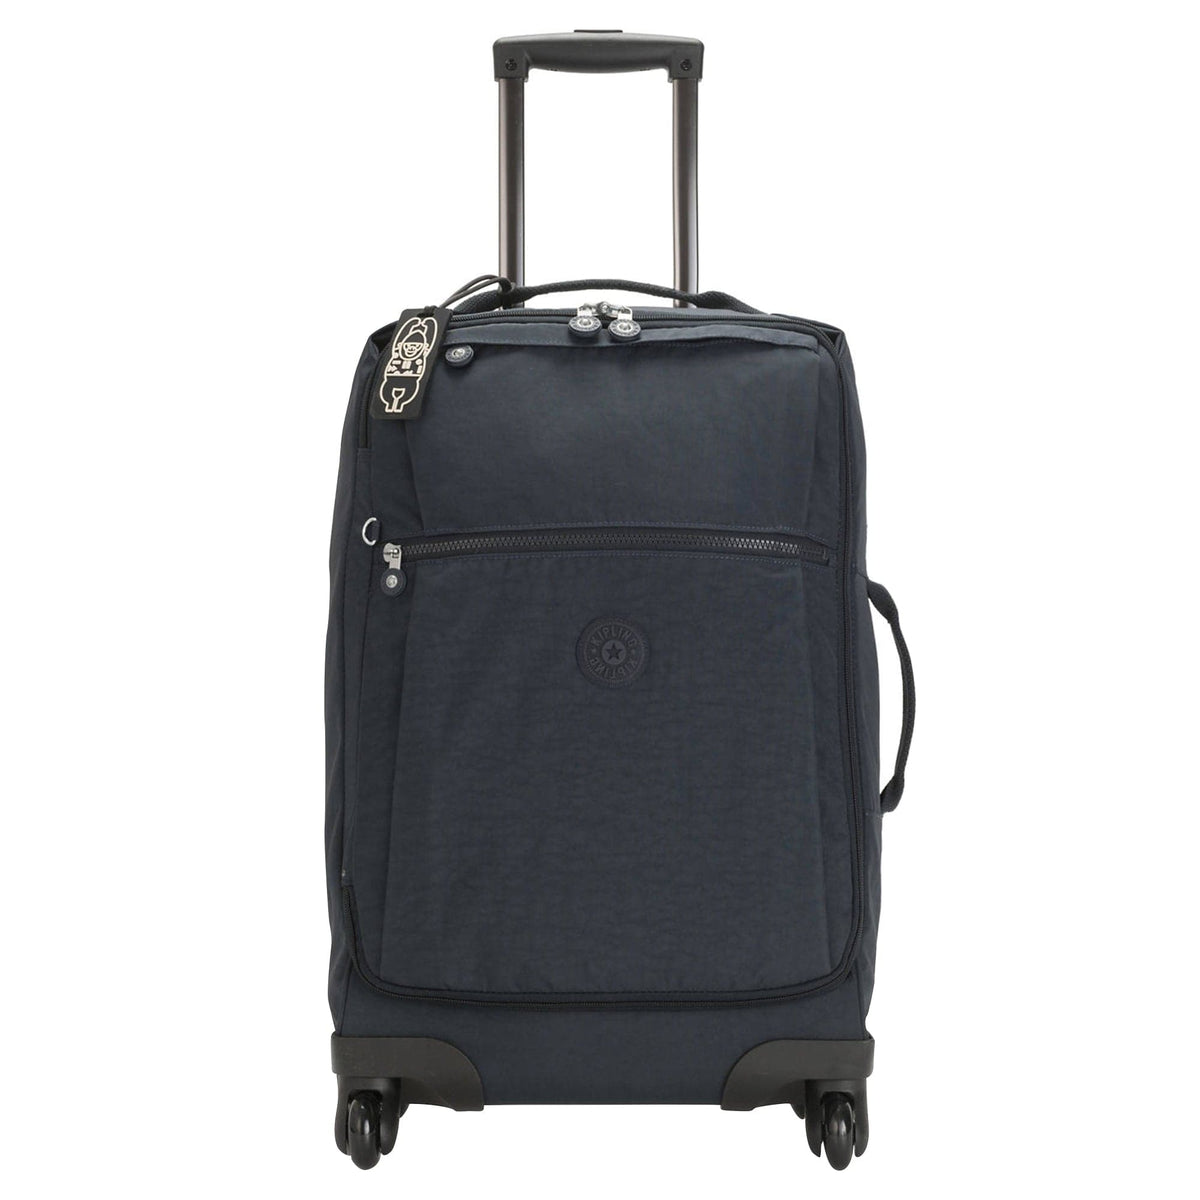 Kipling Darcey Small Carry-On Rolling Luggage 